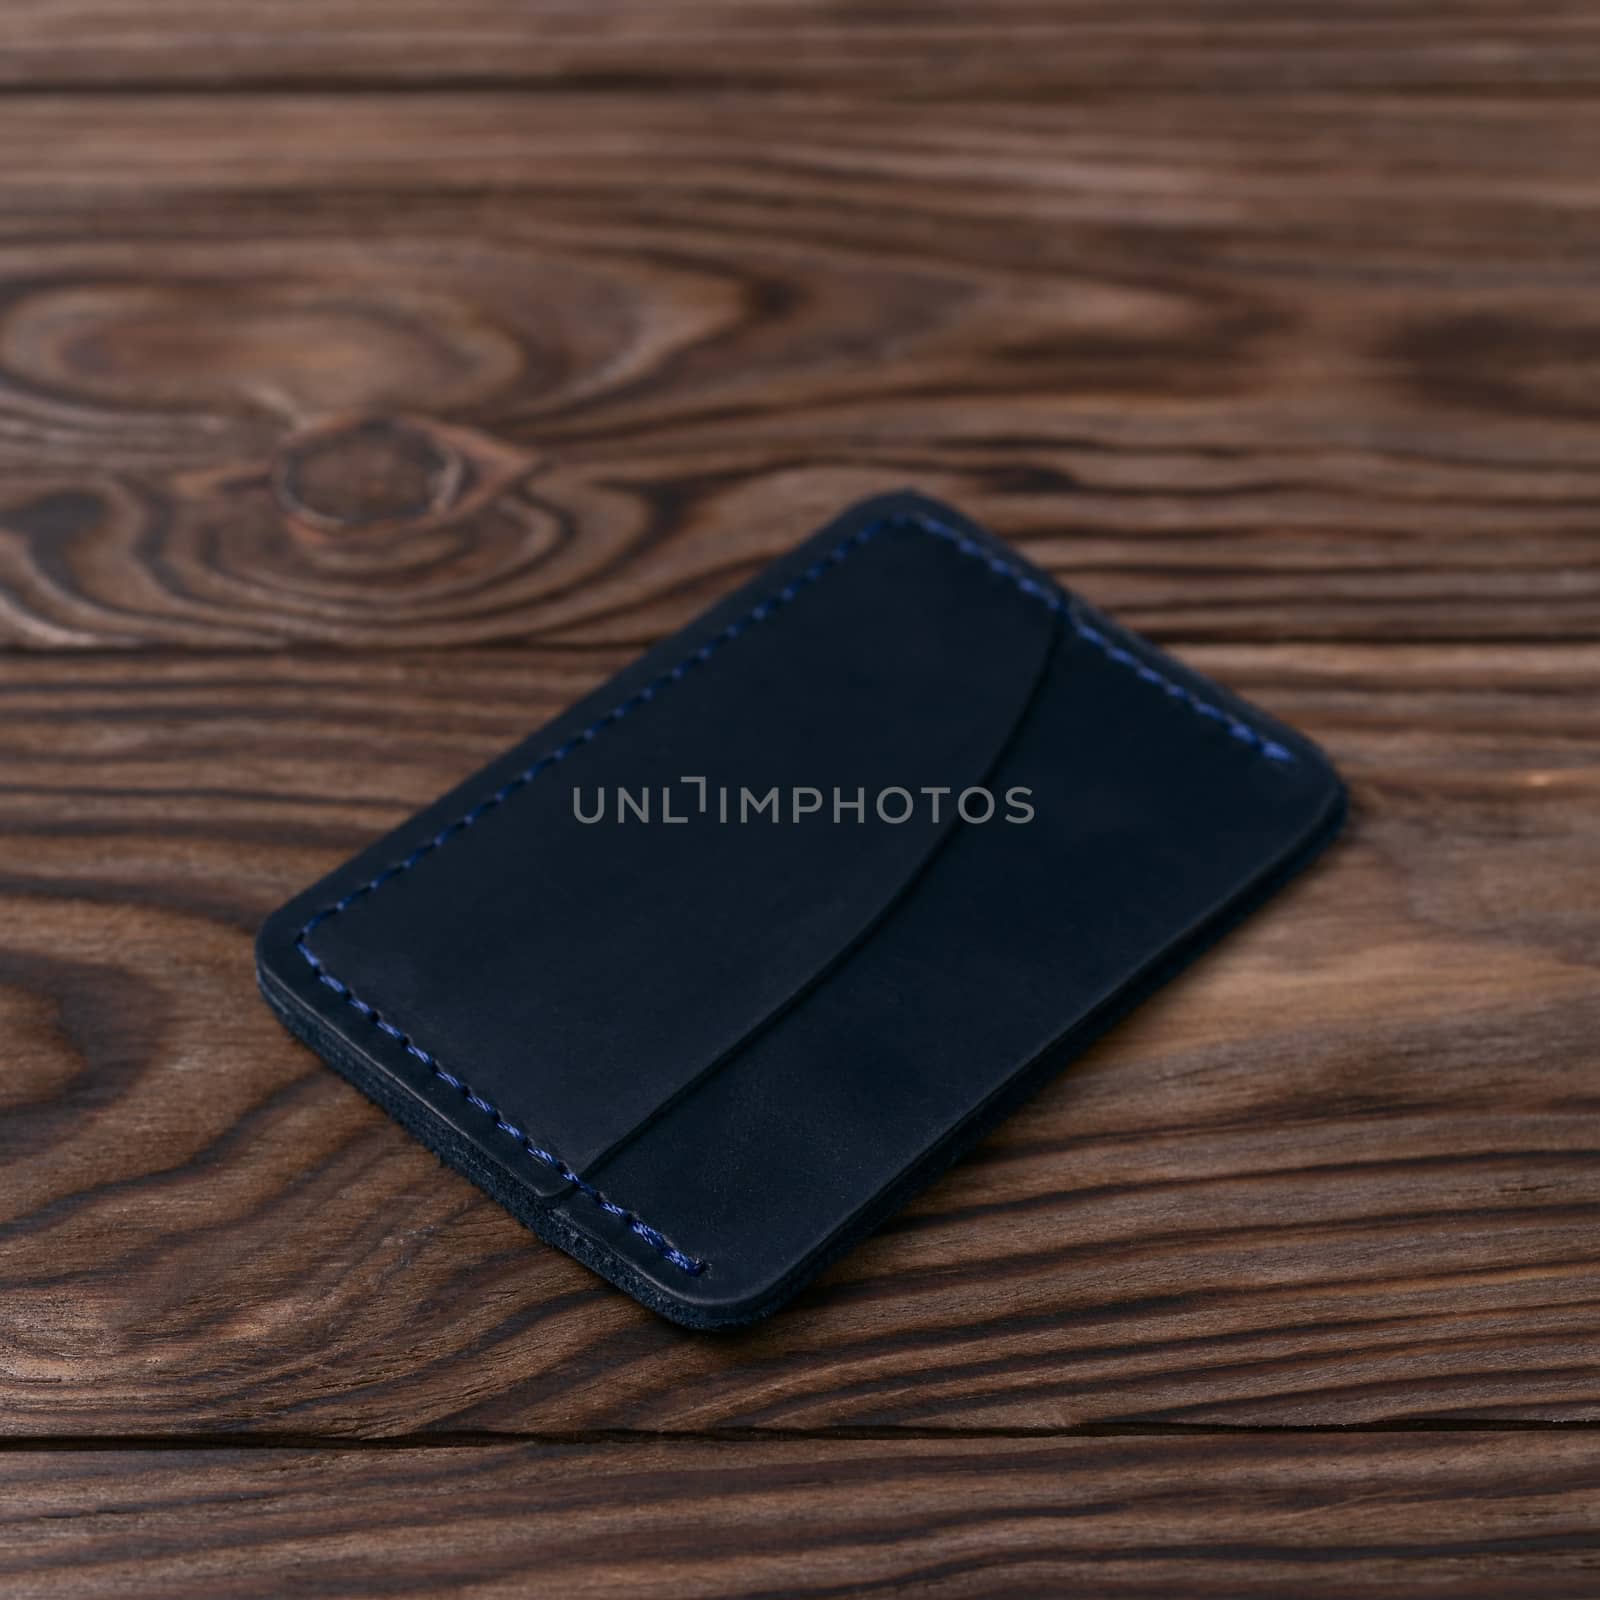 Blue colour handmade leather one pocket cardholder on wooden background. Stock photo with soft blurred background. by alexsdriver